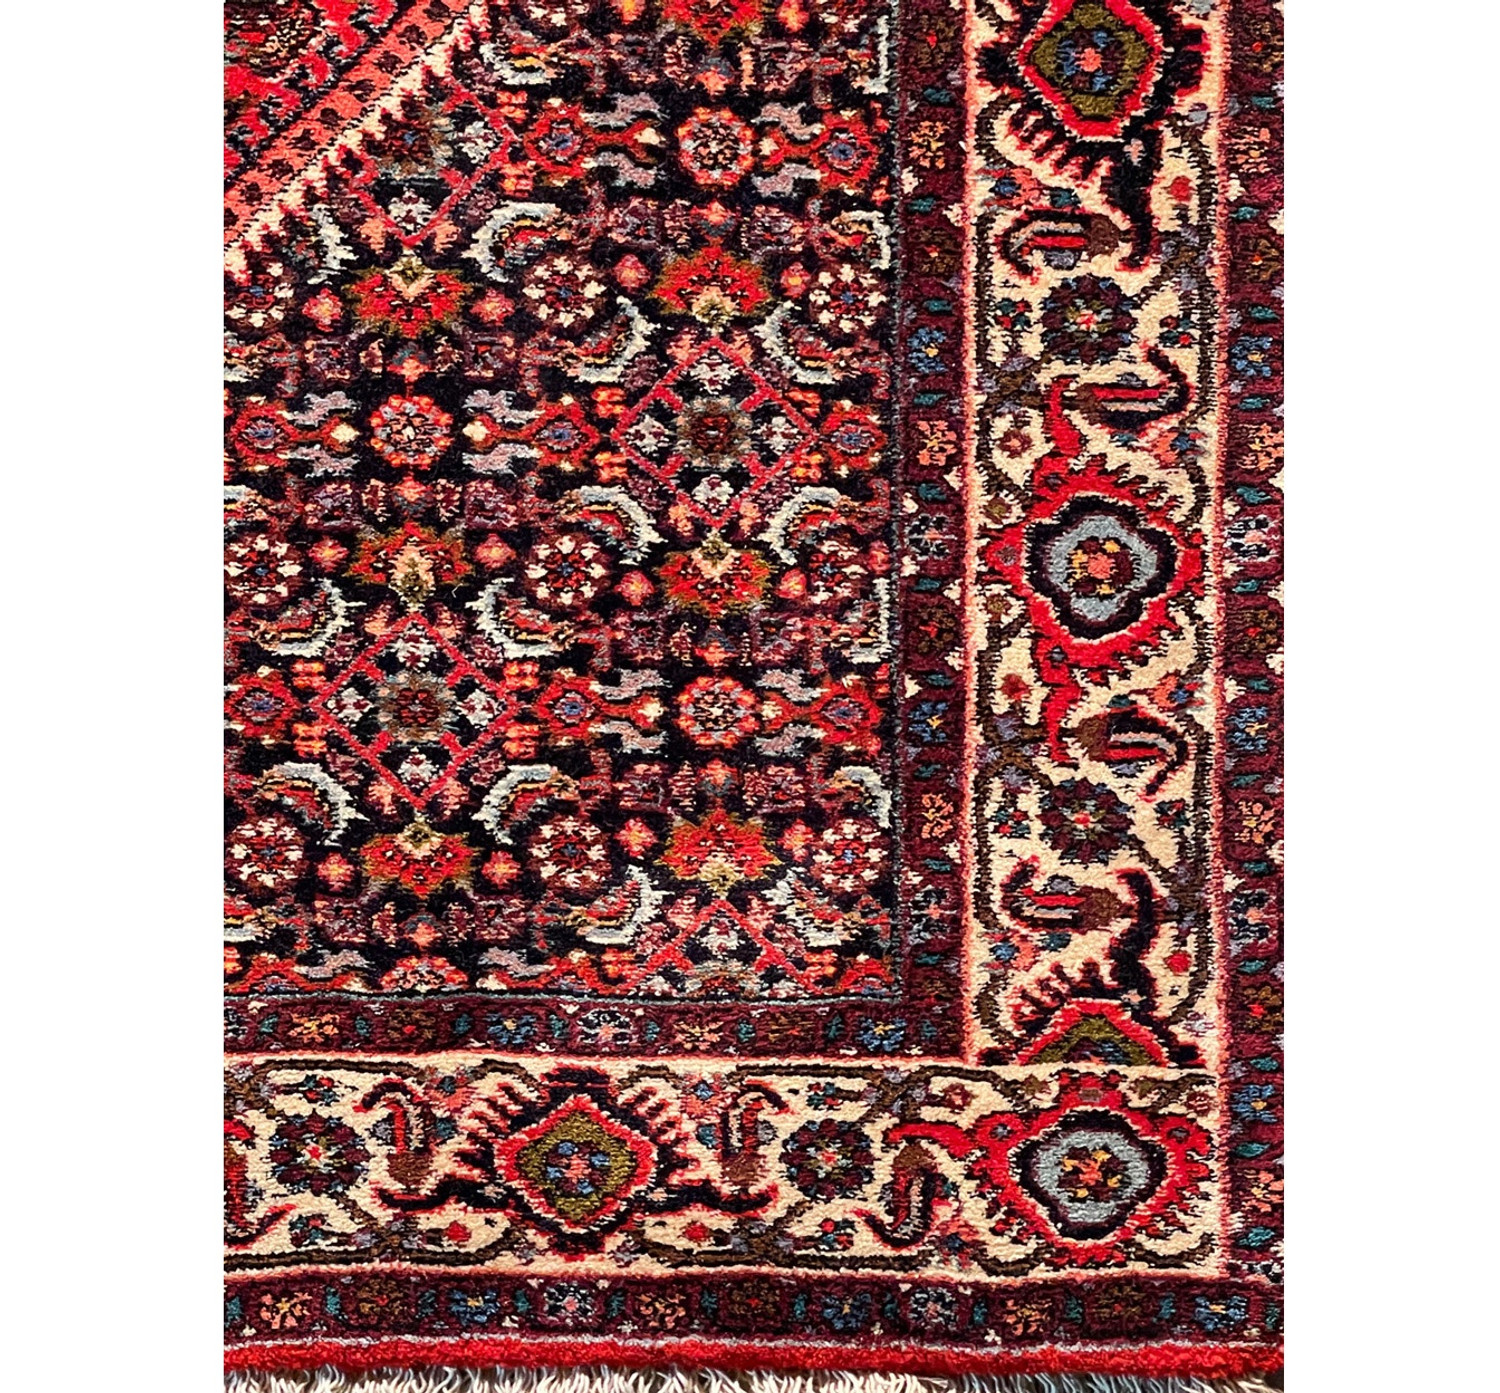 Perspective view of the Persian Bijar rug, illustrating the depth of the design and the plush pile.